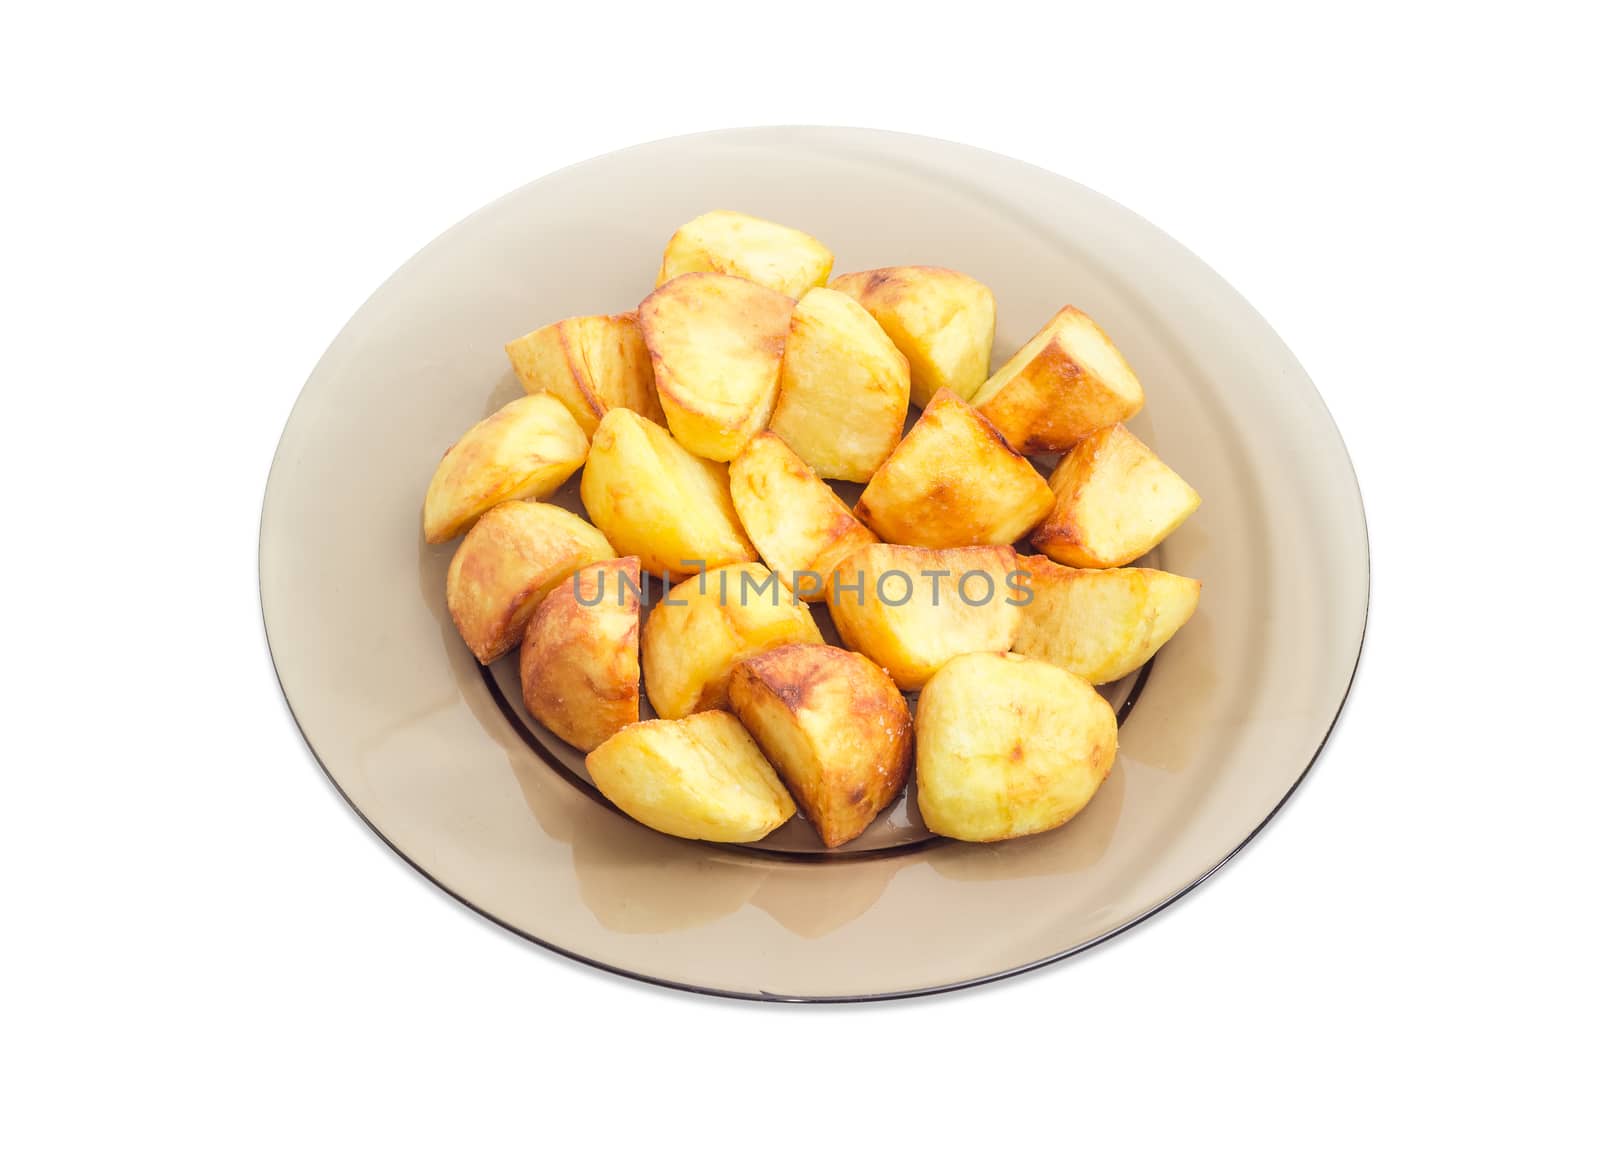 Serving of the country style fried potatoes on the dark glass dish on a light background
